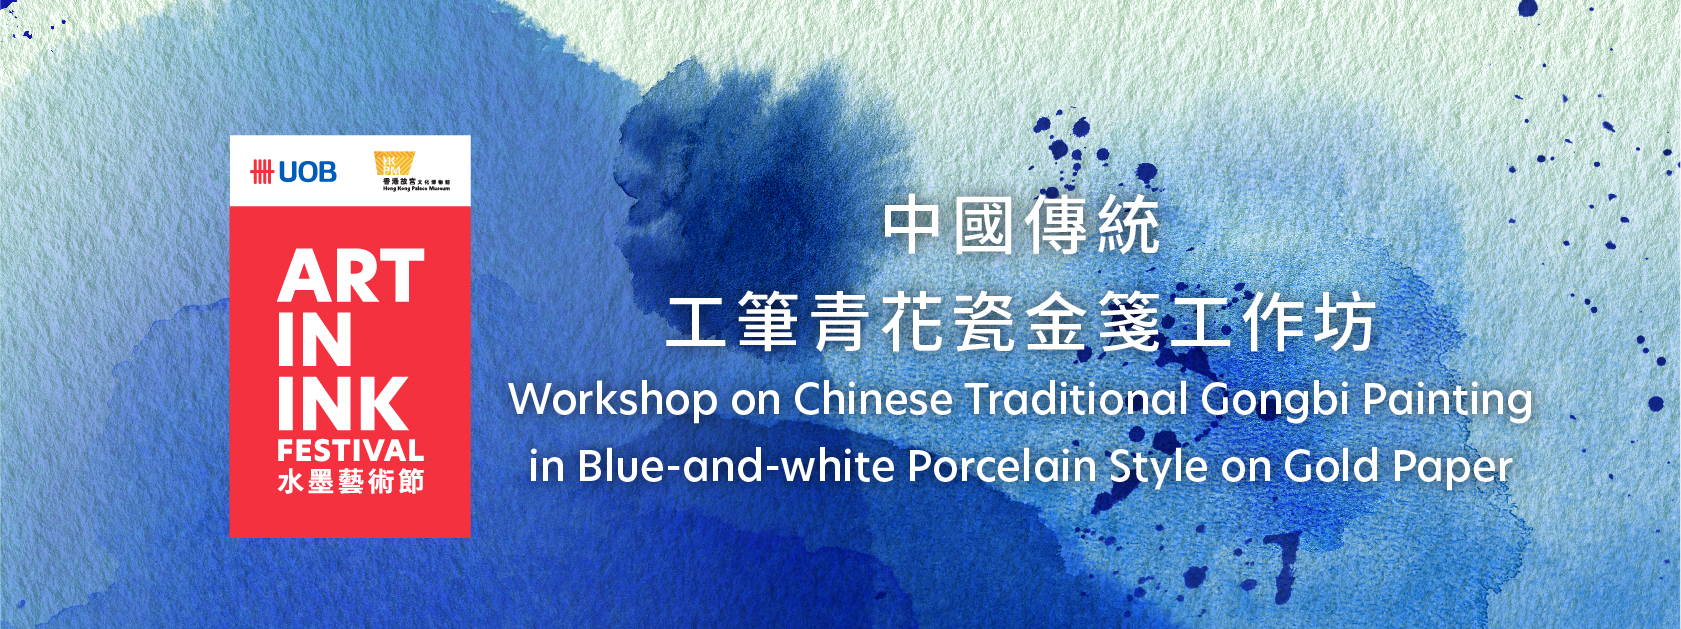 Workshop on Chinese Traditional Gongbi Painting in Blue-and-white Porcelain Style on Gold Paper